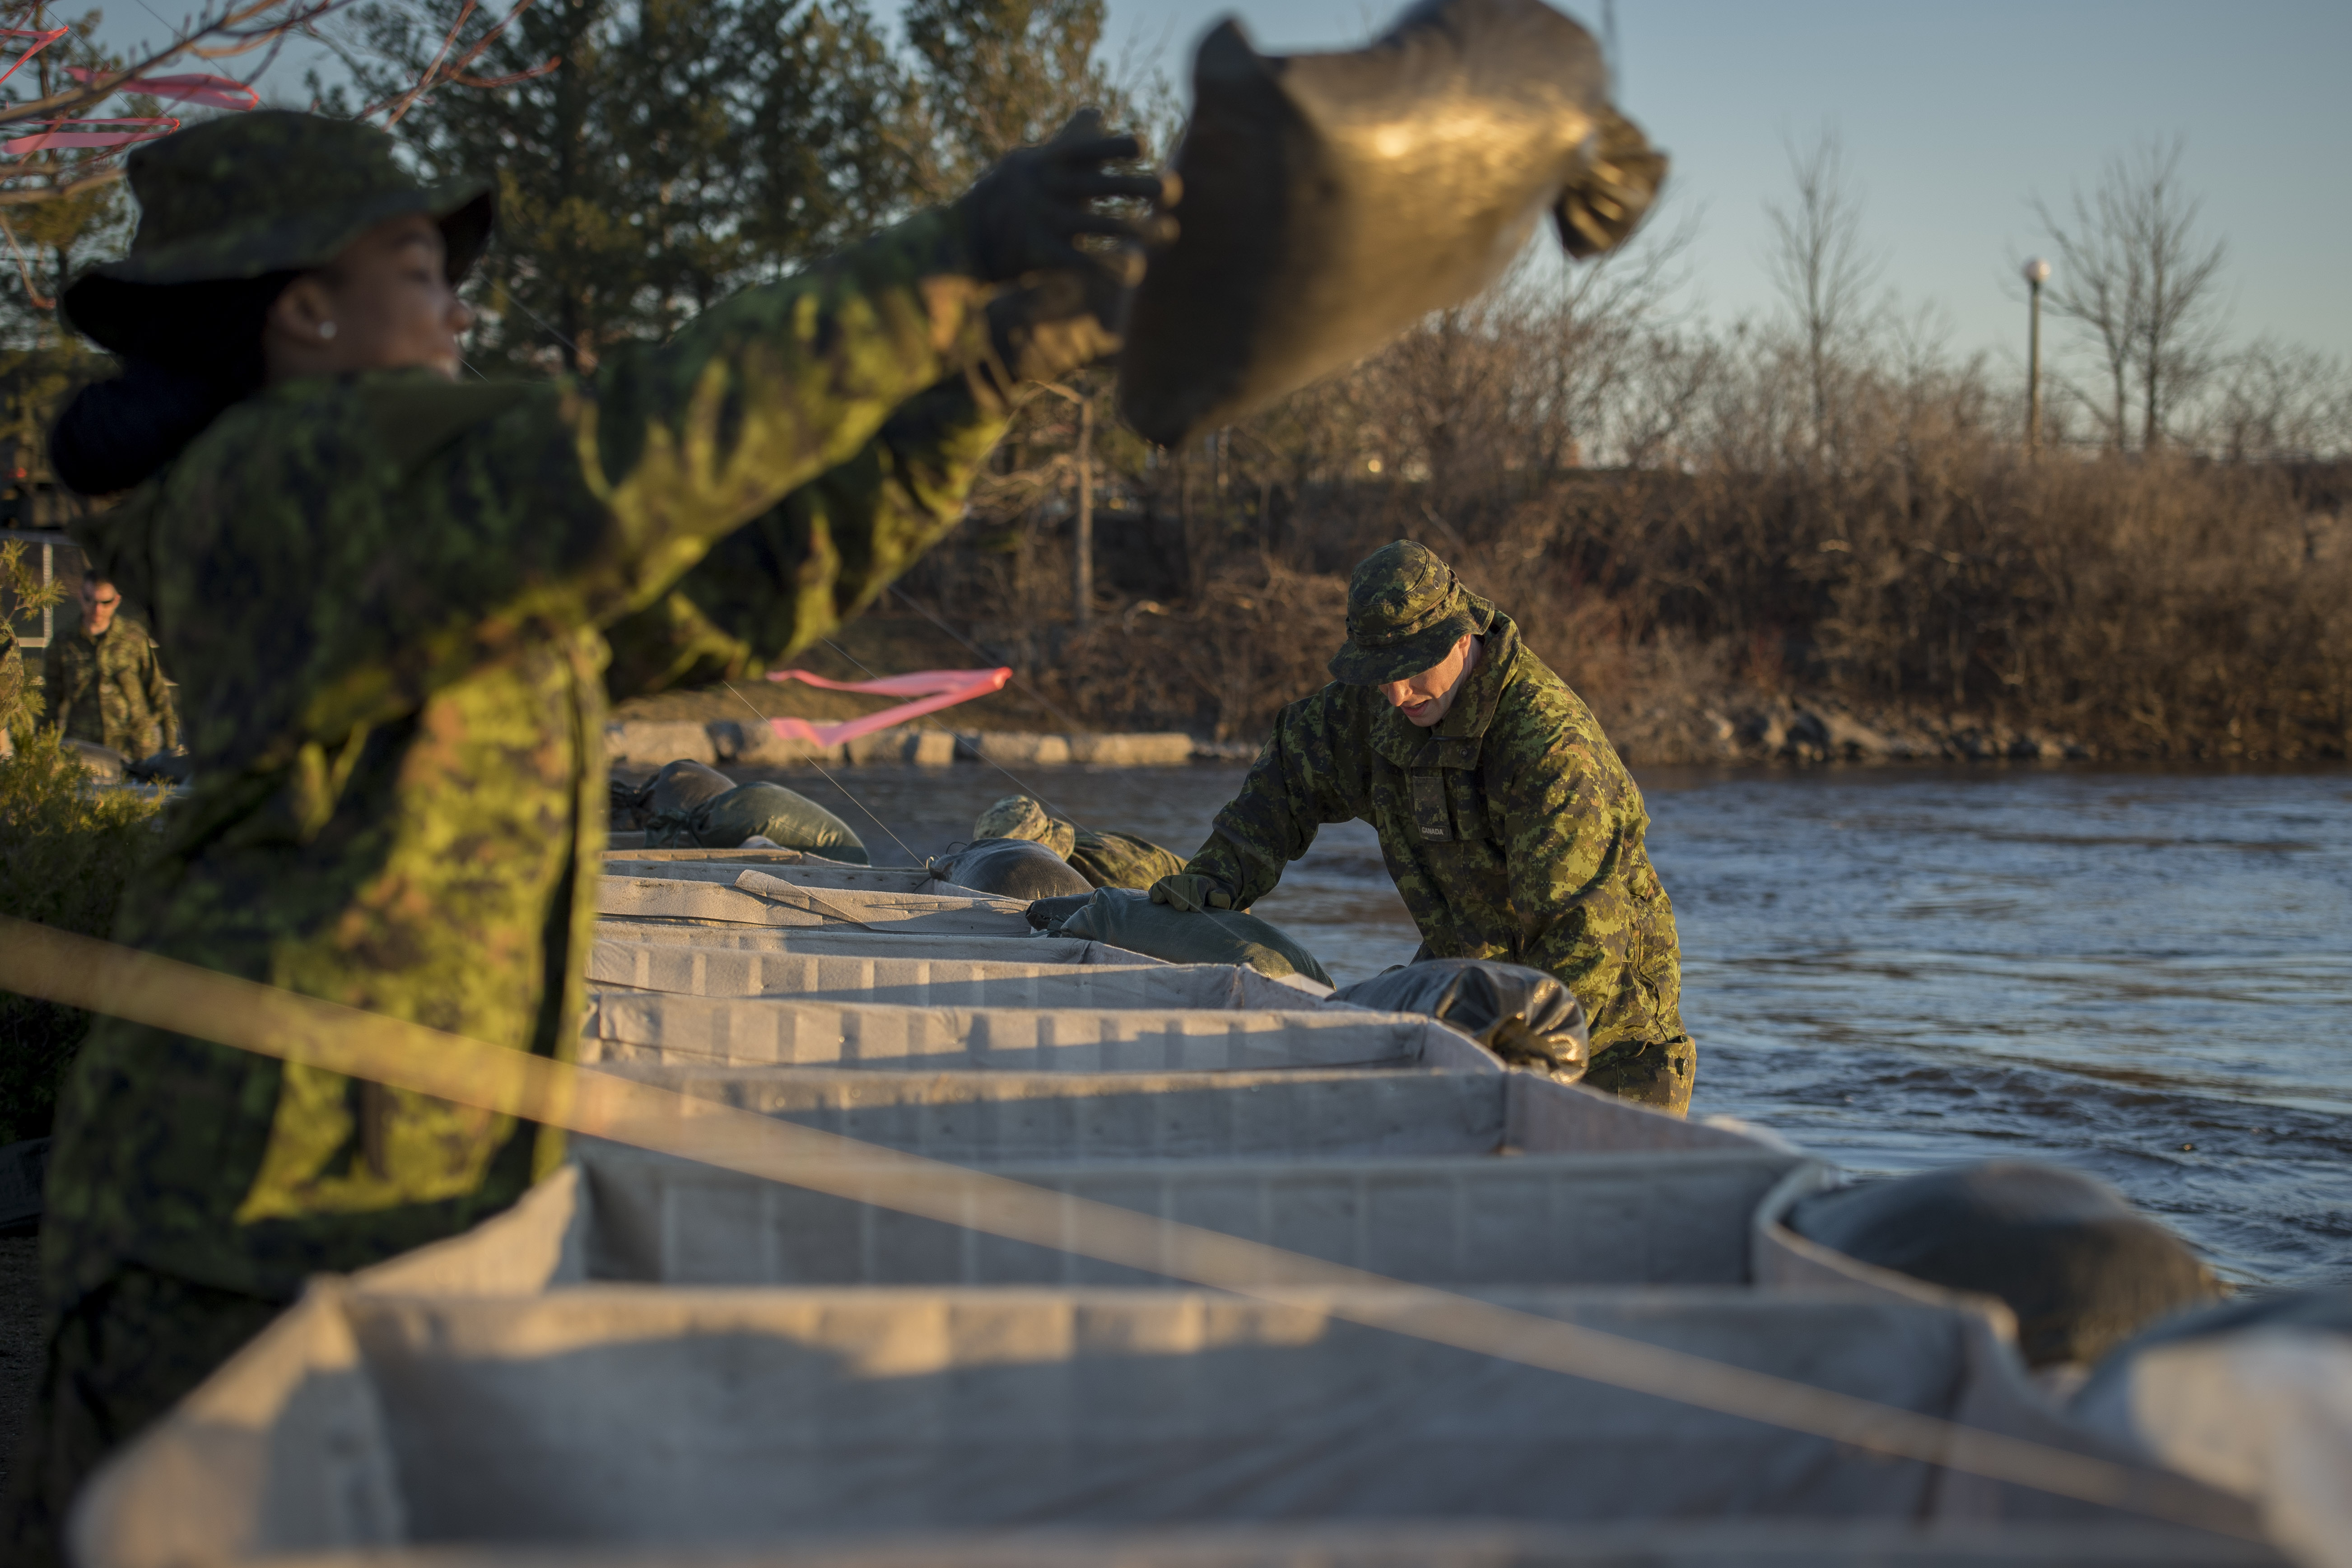 Canadian Armed Forces members assist with flood relief operations at the Lemieux Island Water Treatment Plant in Ottawa during Operation LENTUS, 28 April 2019. Photo: Avr Melissa Gloude, Garrison Imaging Petawawa